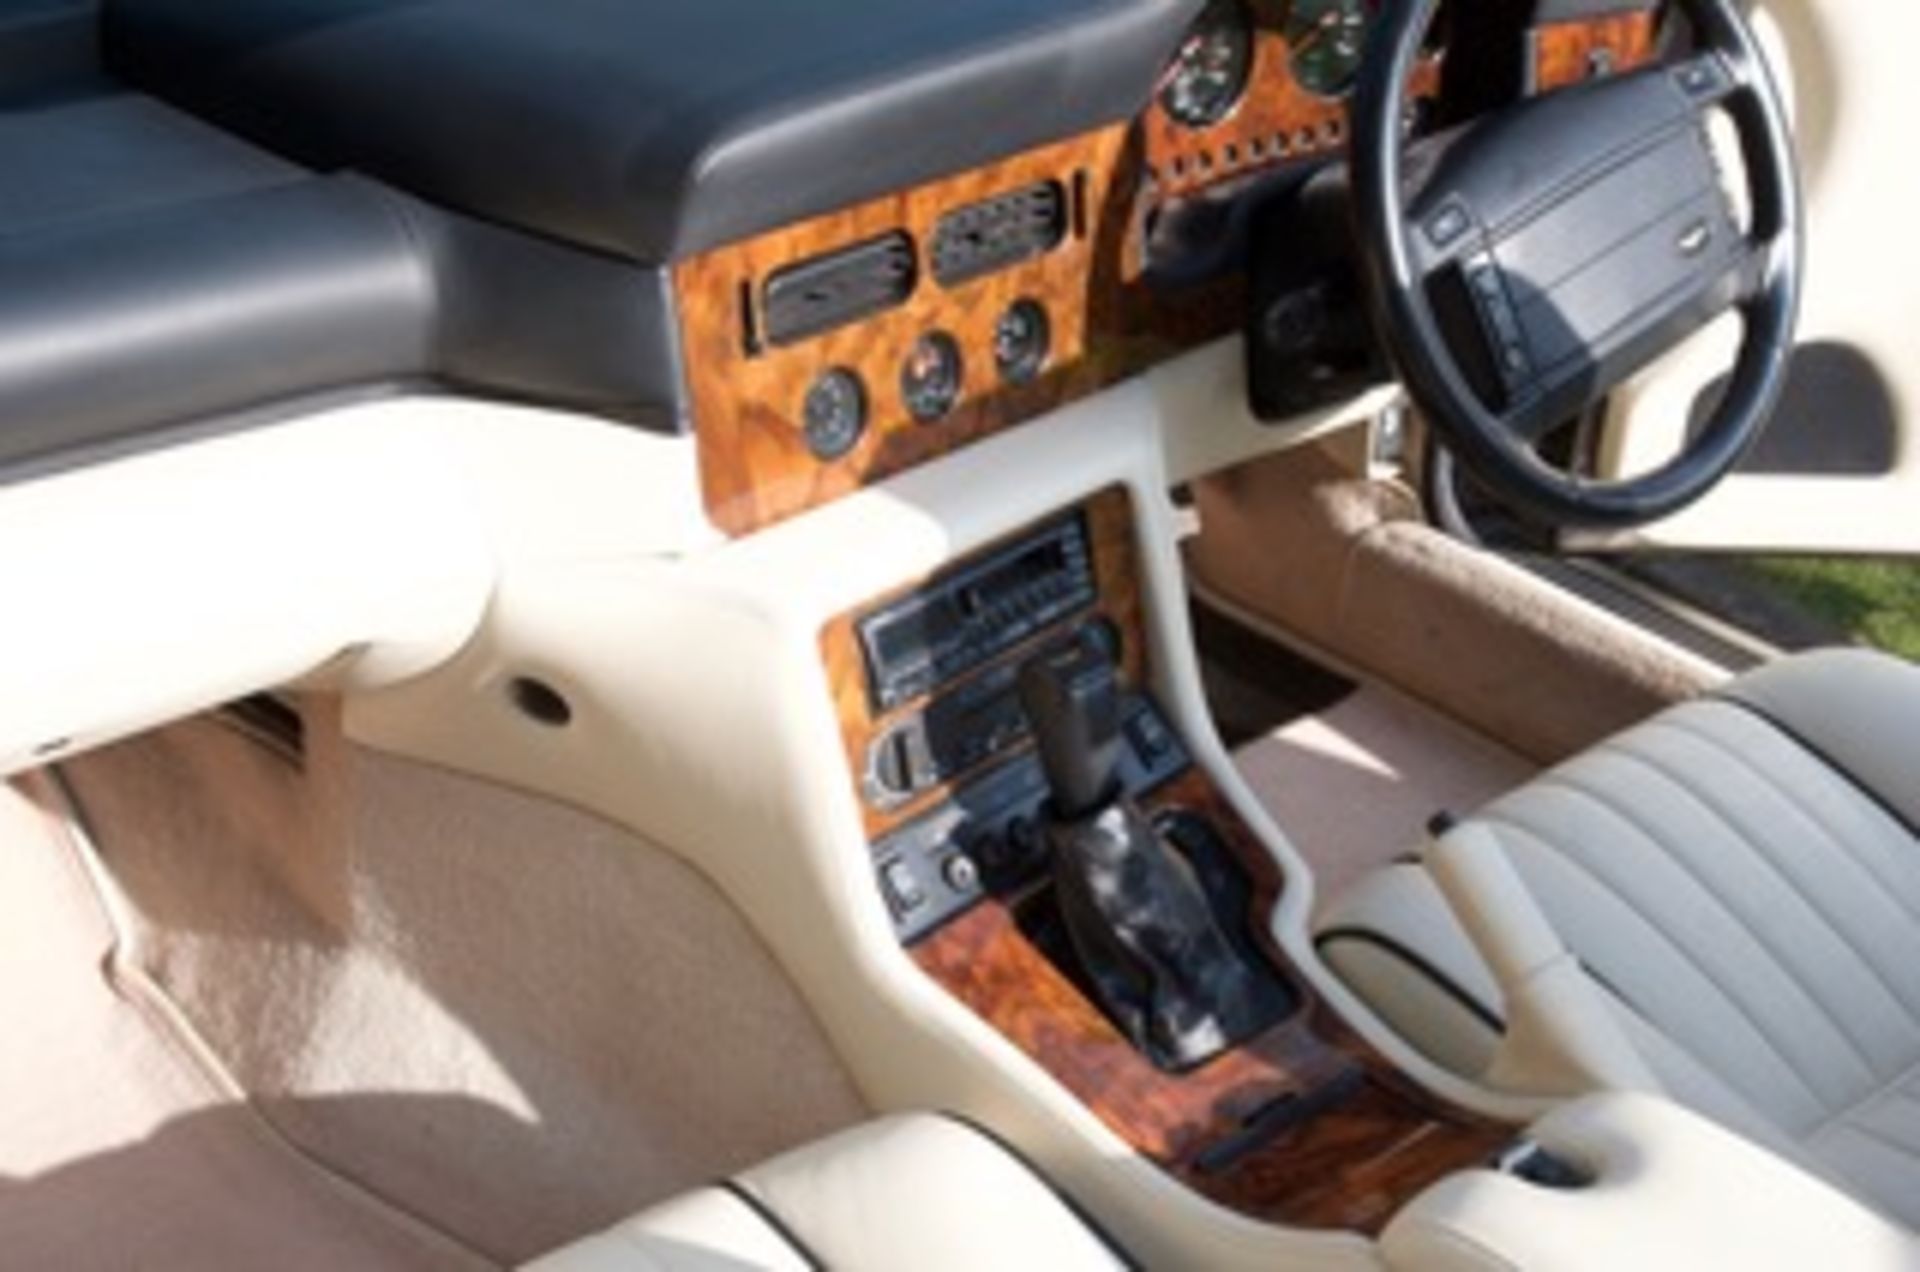 1993 Aston Martin Virage Volante - Having 11 months MOT and aviators number plate H1 AGL - Image 42 of 48